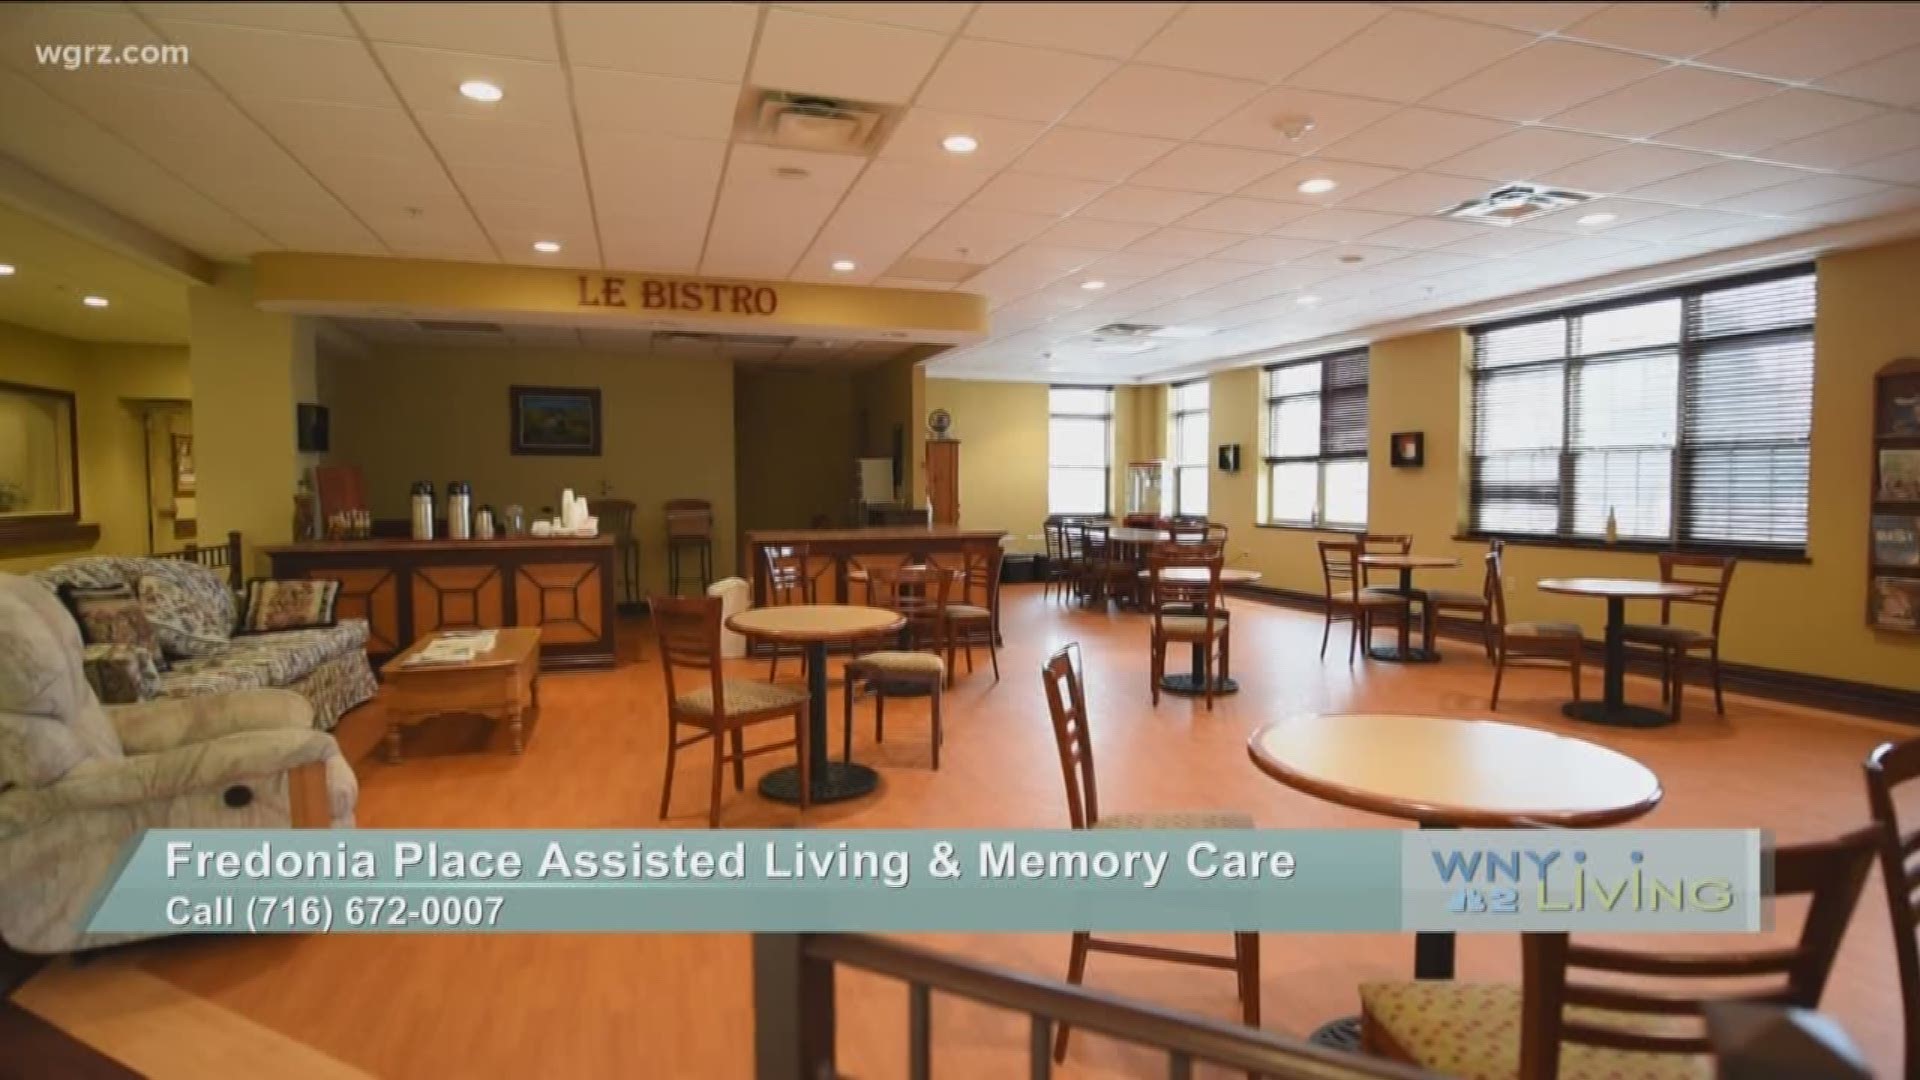 WNY Living - June 15 - Fredonia Place Assisted Living & Memory Care (SPONSORED CONTENT)